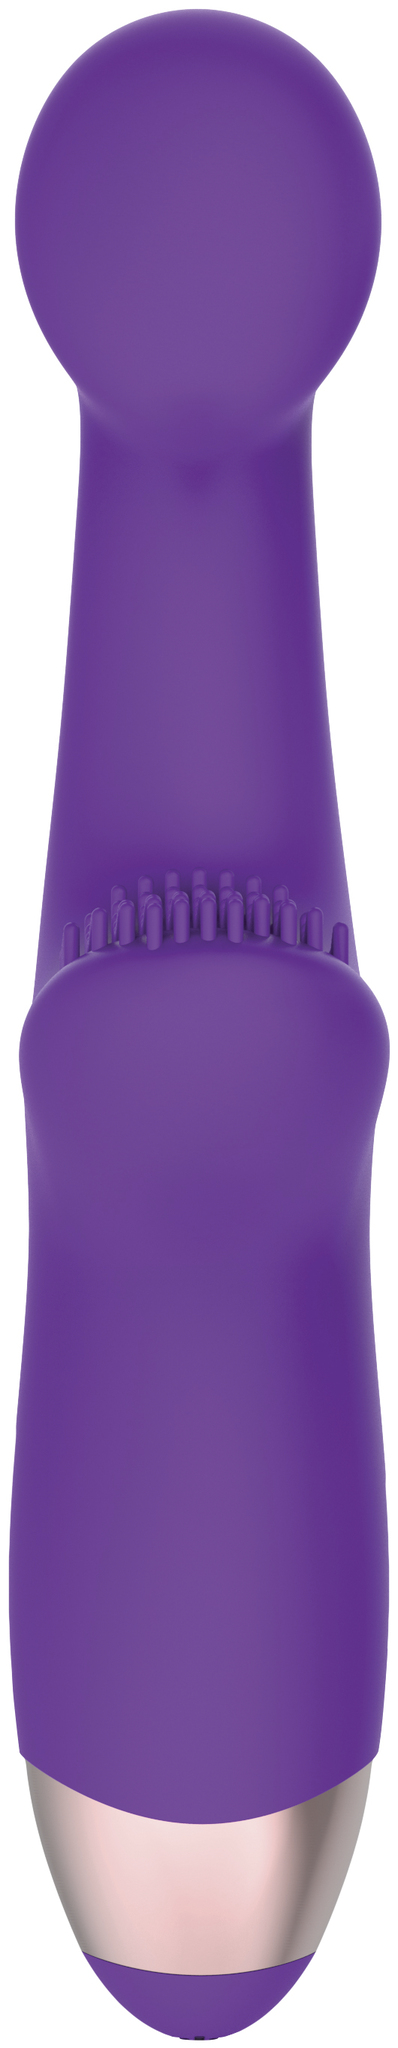 G SPOT PLEASER SILICONE - RECHARGEABLE